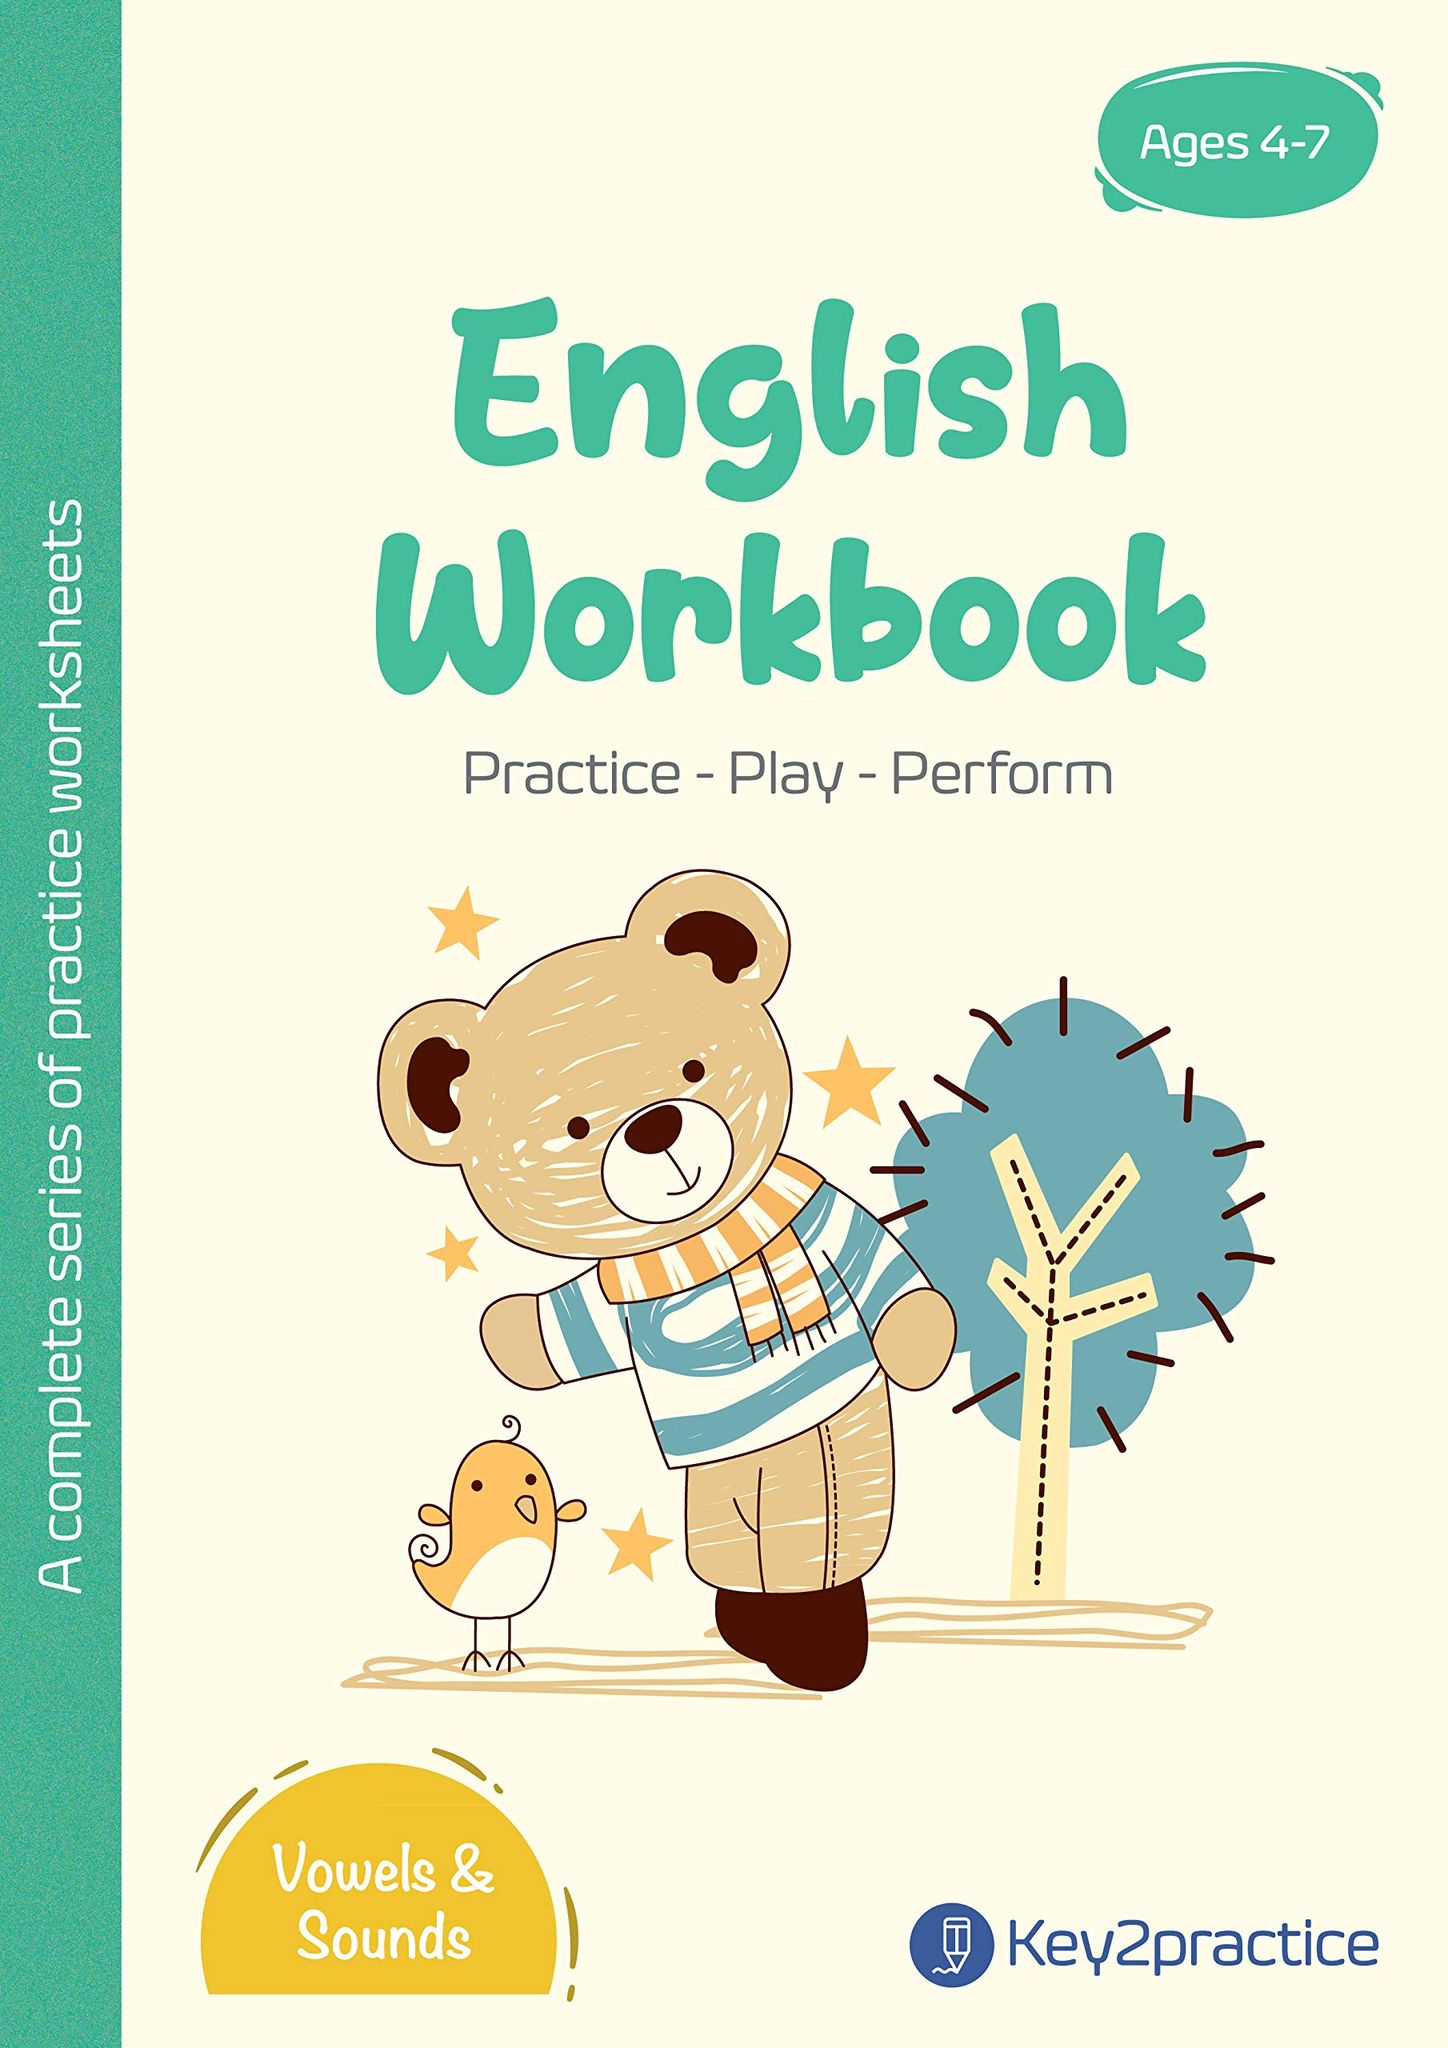 Key2practice Pre Primary (Ages 4-7 yrs) English Grammar Workbook | Topic - Blends Part 1 | 54 Colourful Practice Worksheets with Answers | Designed by IITians